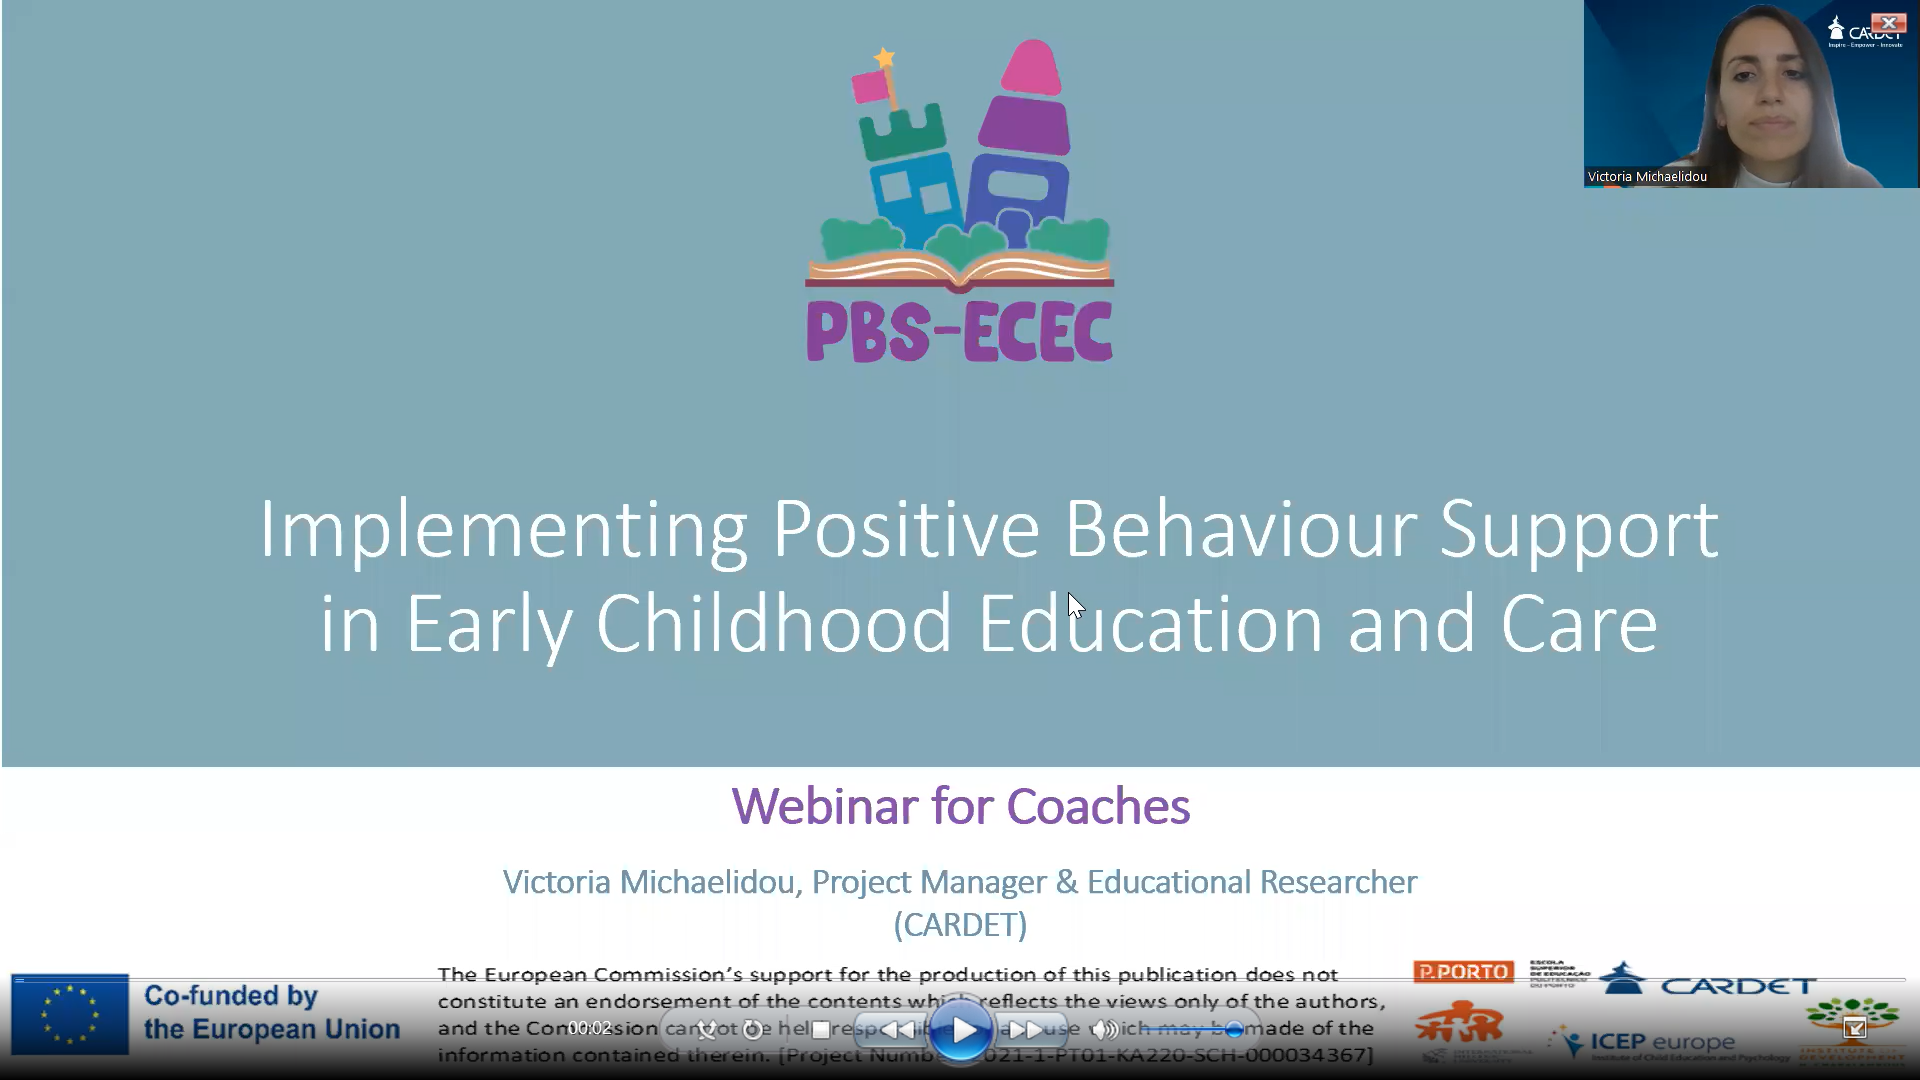 The PBS-ECEC first part of the coaches’ induction workshop took place today via a webinar organized by CARDET.